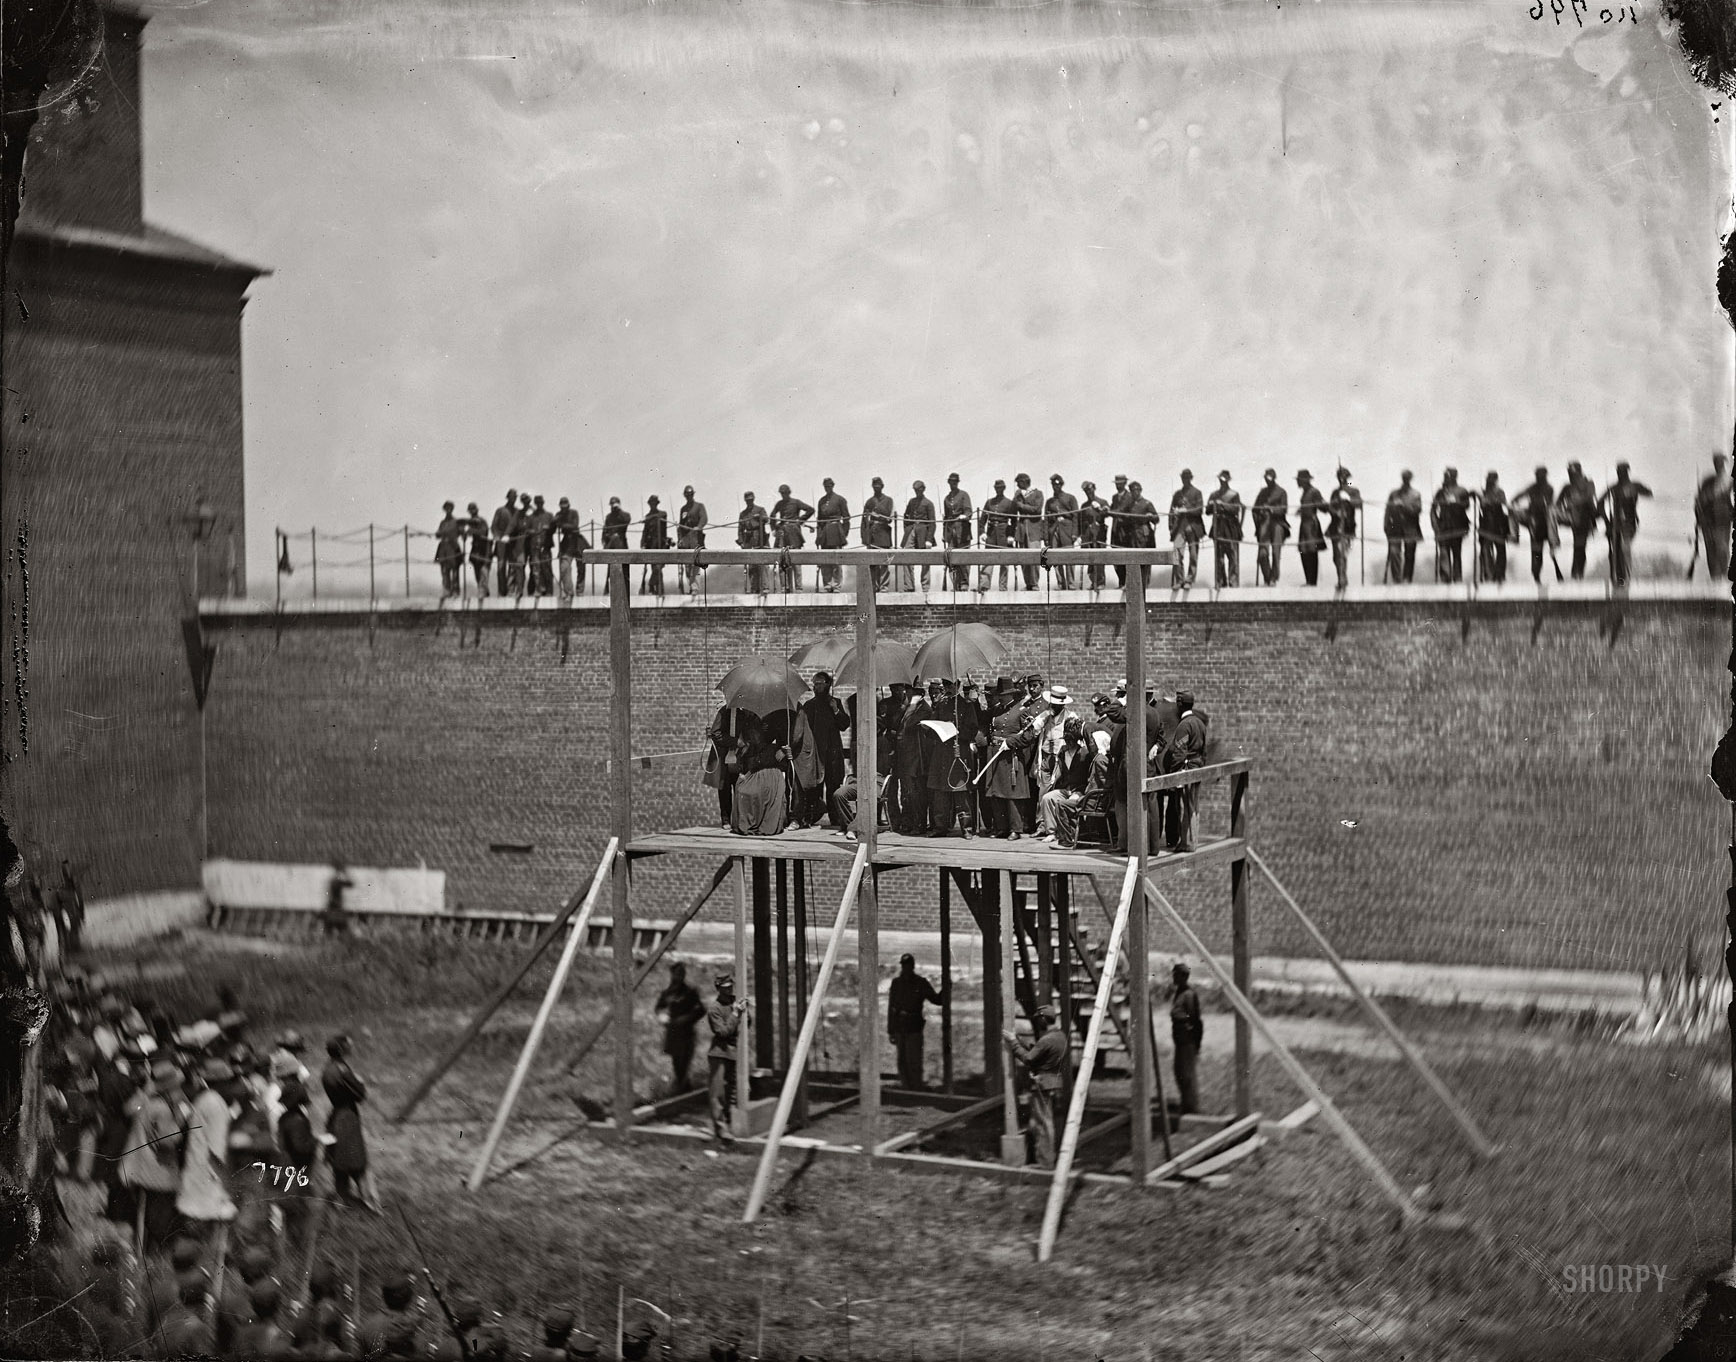 Gen. John F. Hartranft reading the death warrant to the four condemned Lincoln assassination conspirators (Mrs. Surratt, Payne, Herold, Atzerodt) on the scaffold at Fort McNair, Washington. July 7, 1865. View full size. Photograph by Alexander Gardner. More execution photos at GhostCowboy.